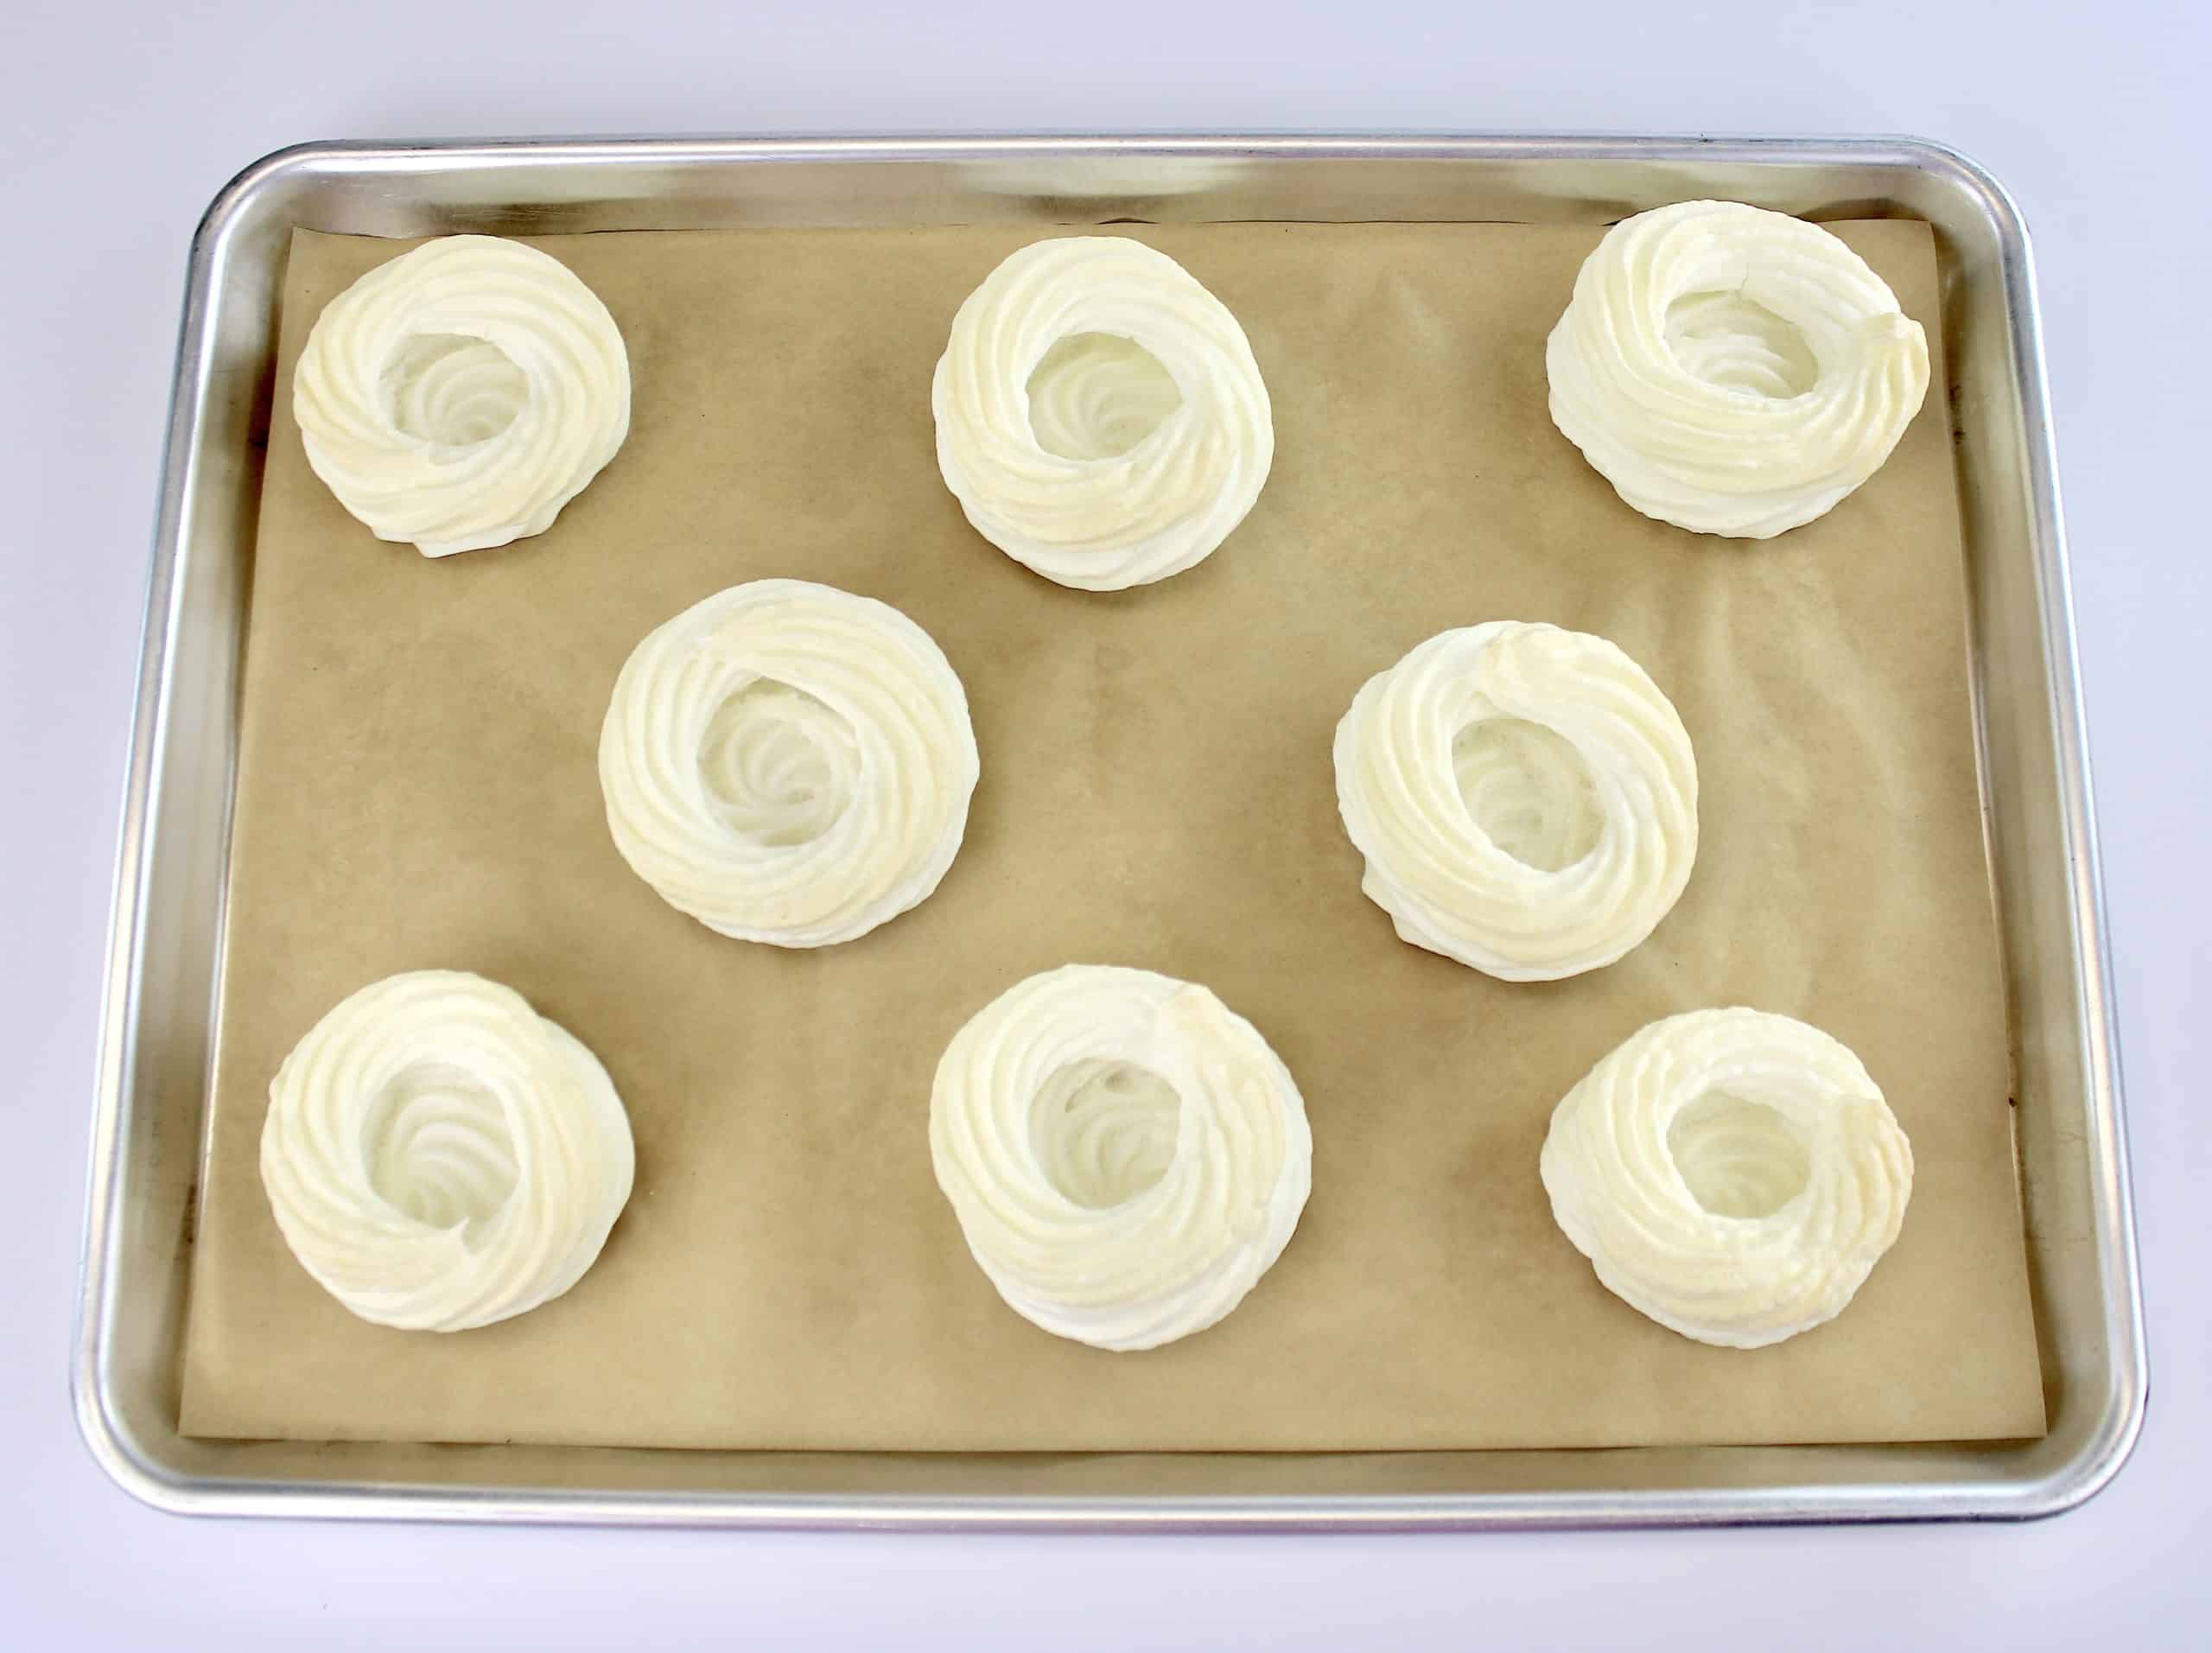 8 mini pavlovas baked on sheet pan lined with parchment paper